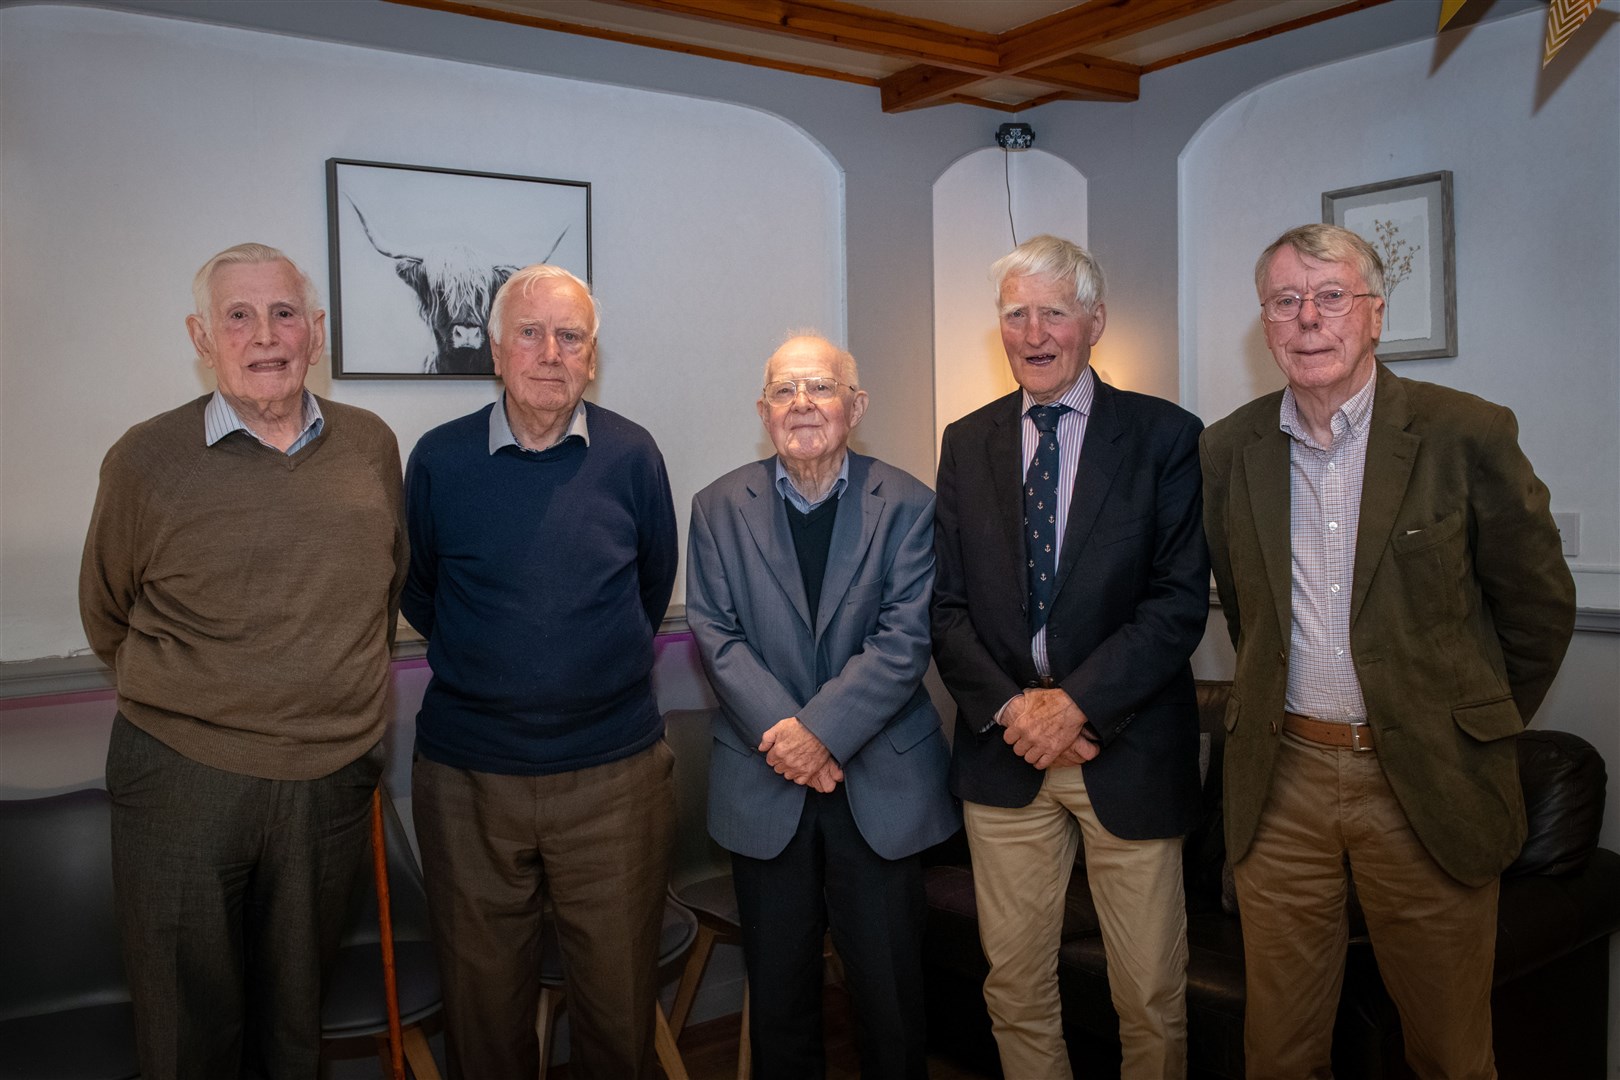 Reuniting to catch up and recall old times at The Cottage Bar in Maryburgh were Sandy Macdonald, Eric Munro, John C. Mackay, John A MacRae and Roy MacIntyre. Picture: Callum Mackay